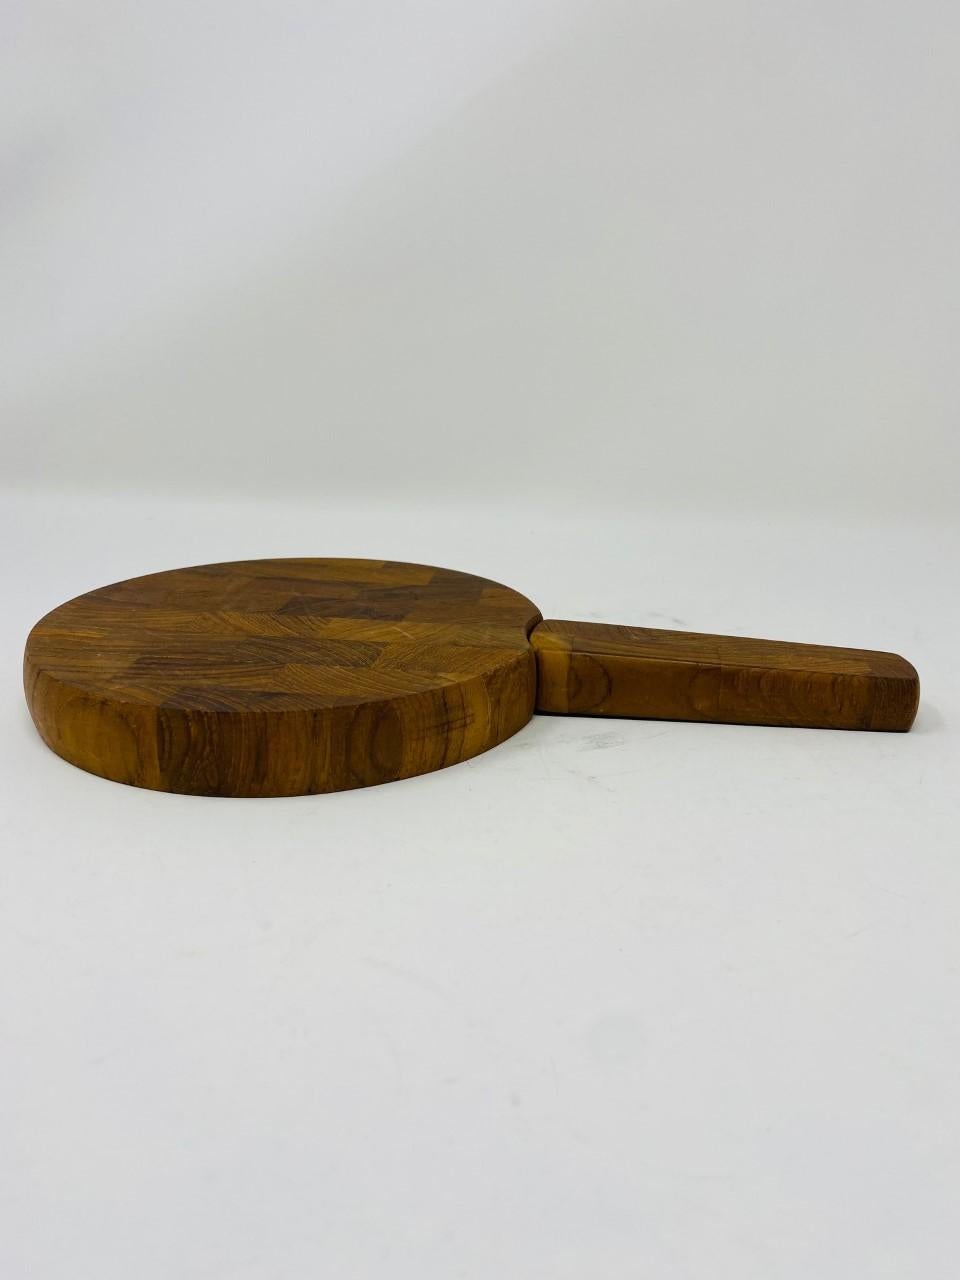 Mid-20th Century Jens Quistgaard for Dansk Teak Cheese Cutting Board with Built in Knife, 1960s For Sale